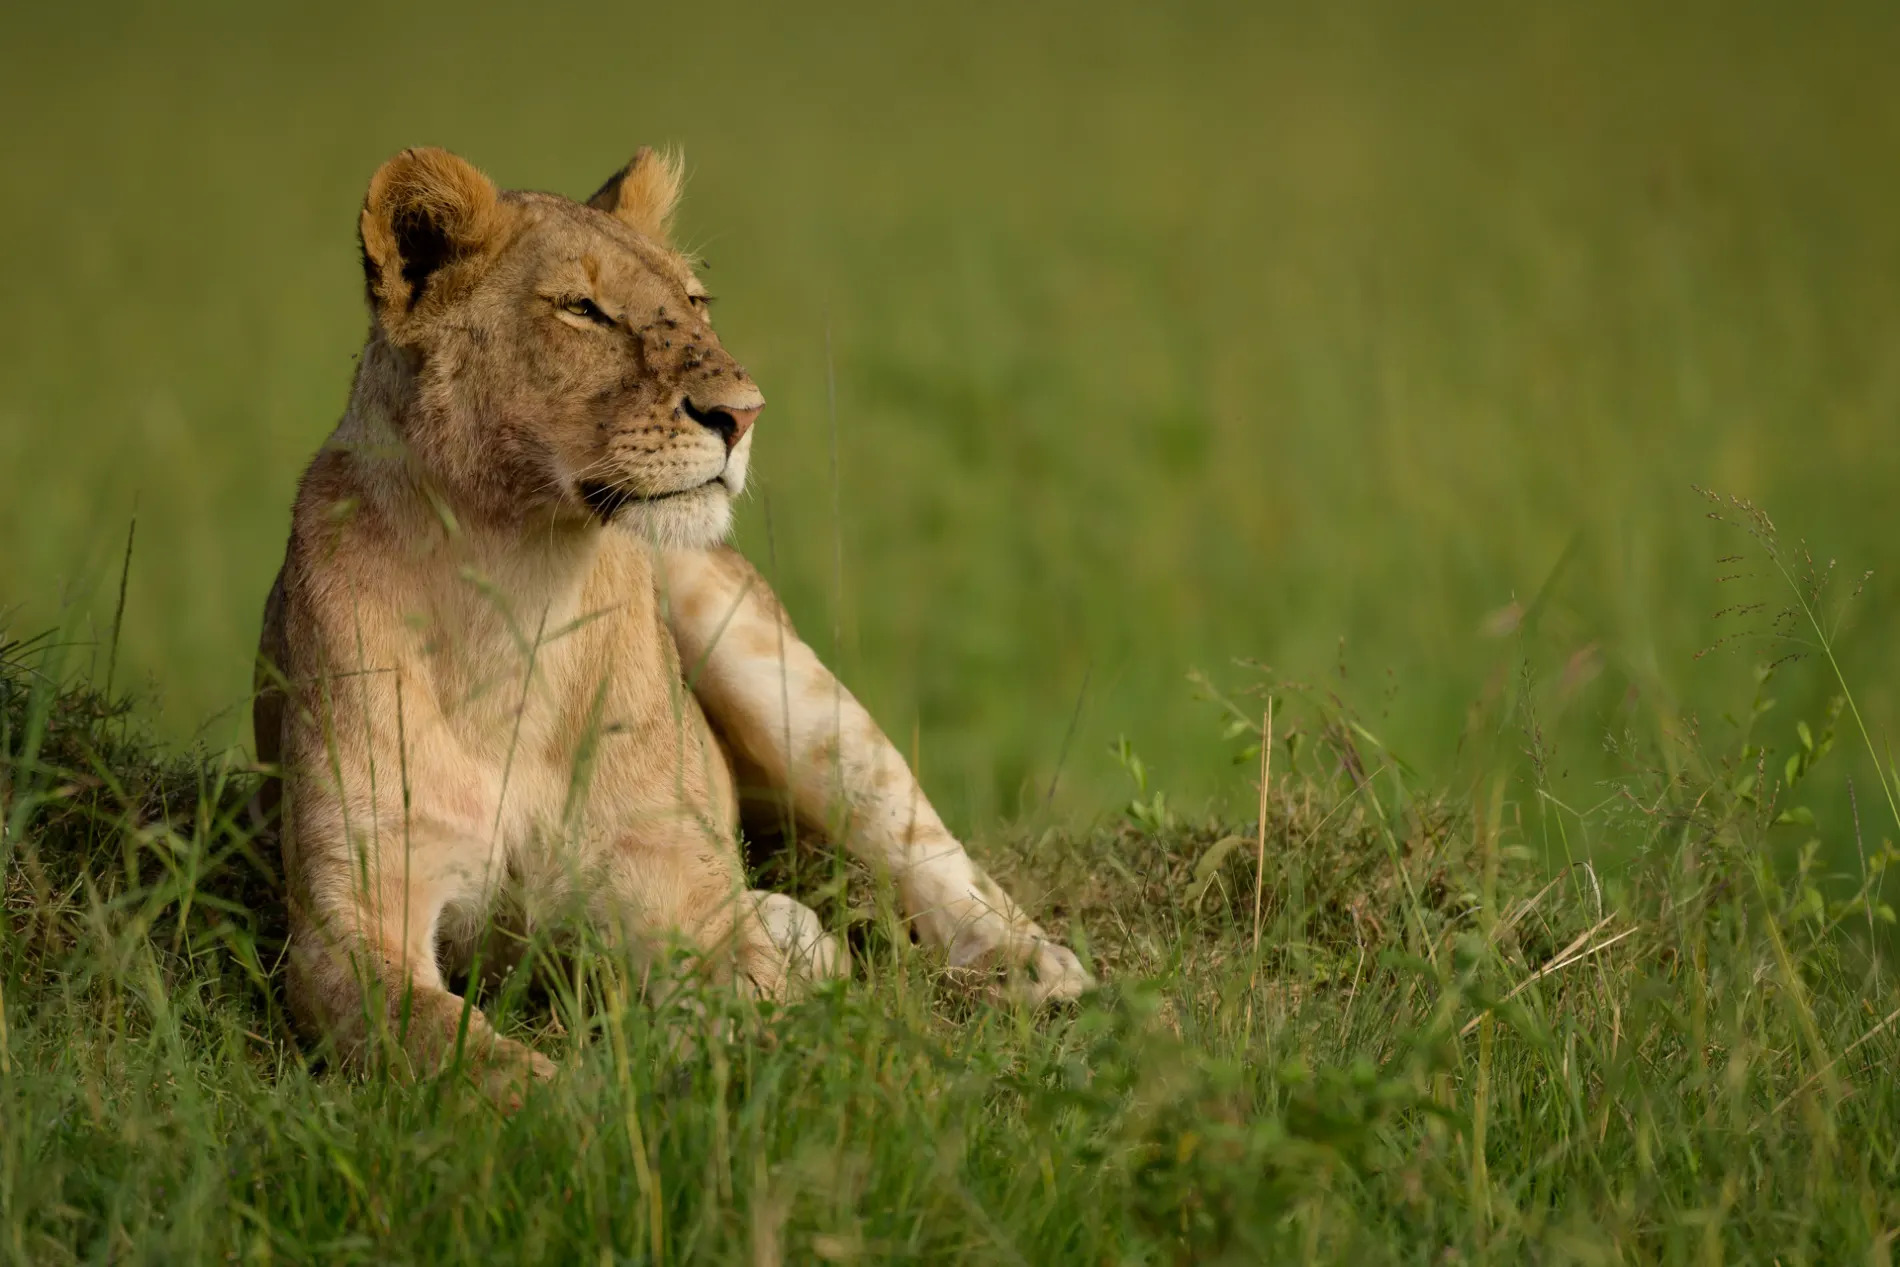 Lioness and green sitting